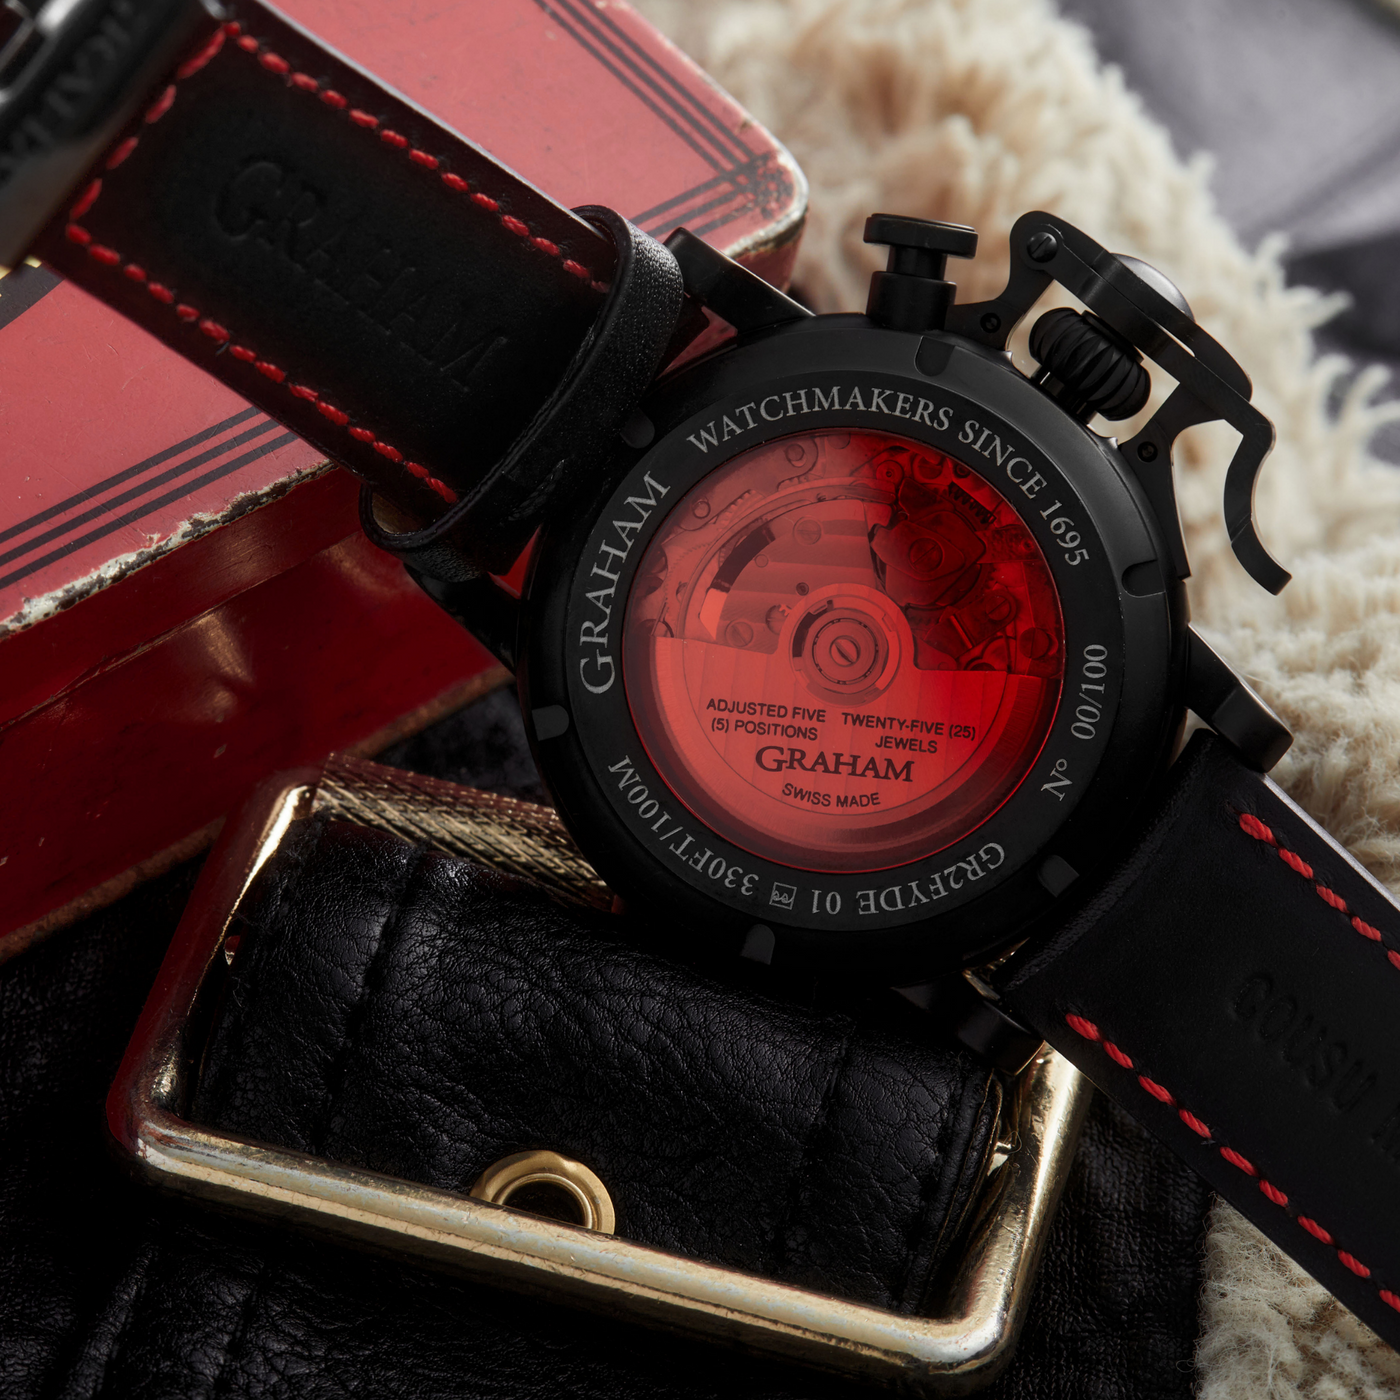 CHRONOFIGHTER VINTAGE - DLC RED LIMITED EDITION